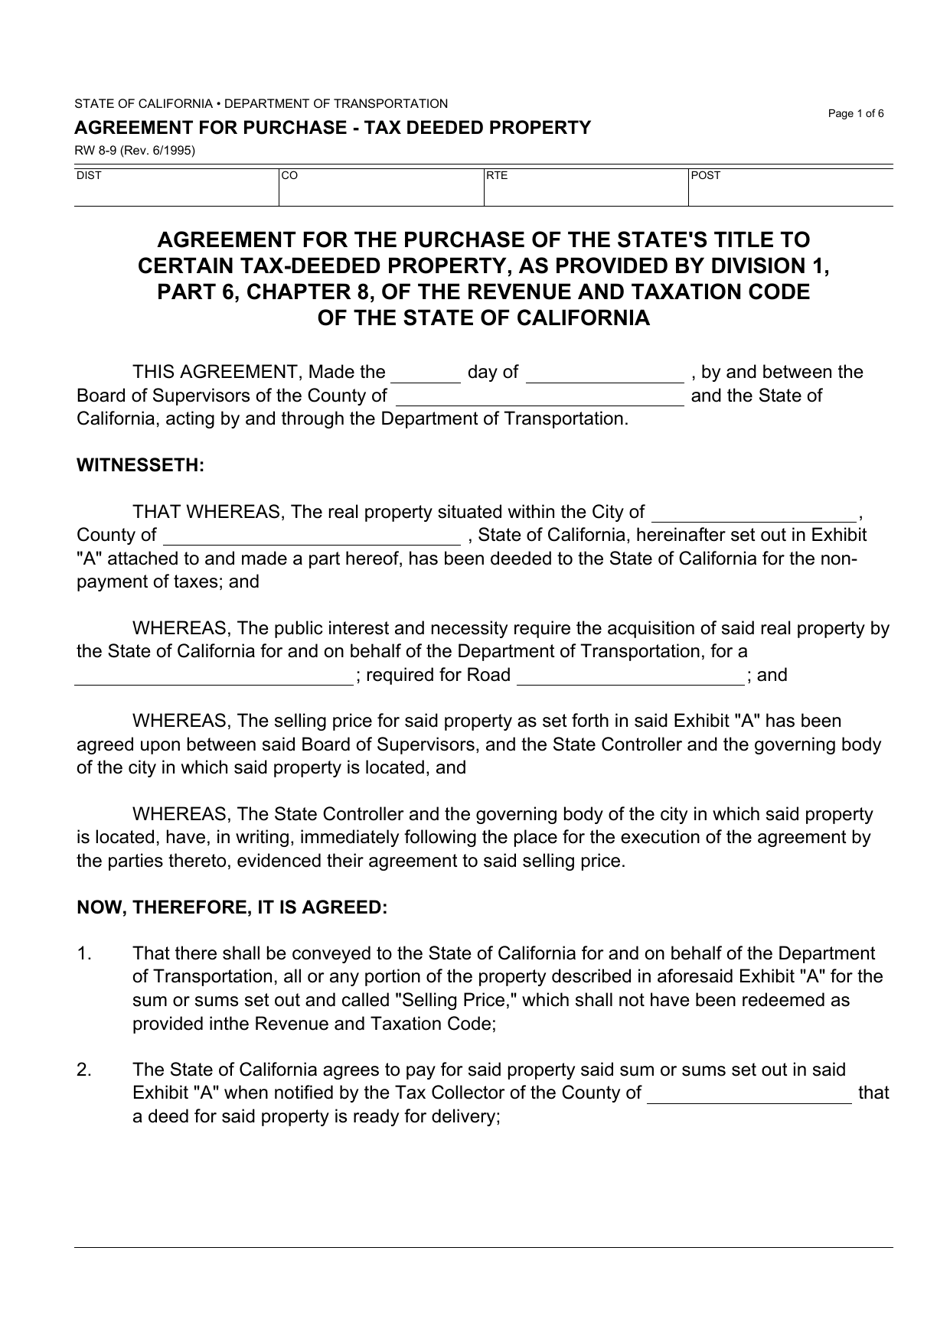 Form RW8-9 Agreement for Purchase - Tax Deeded Property - California, Page 1